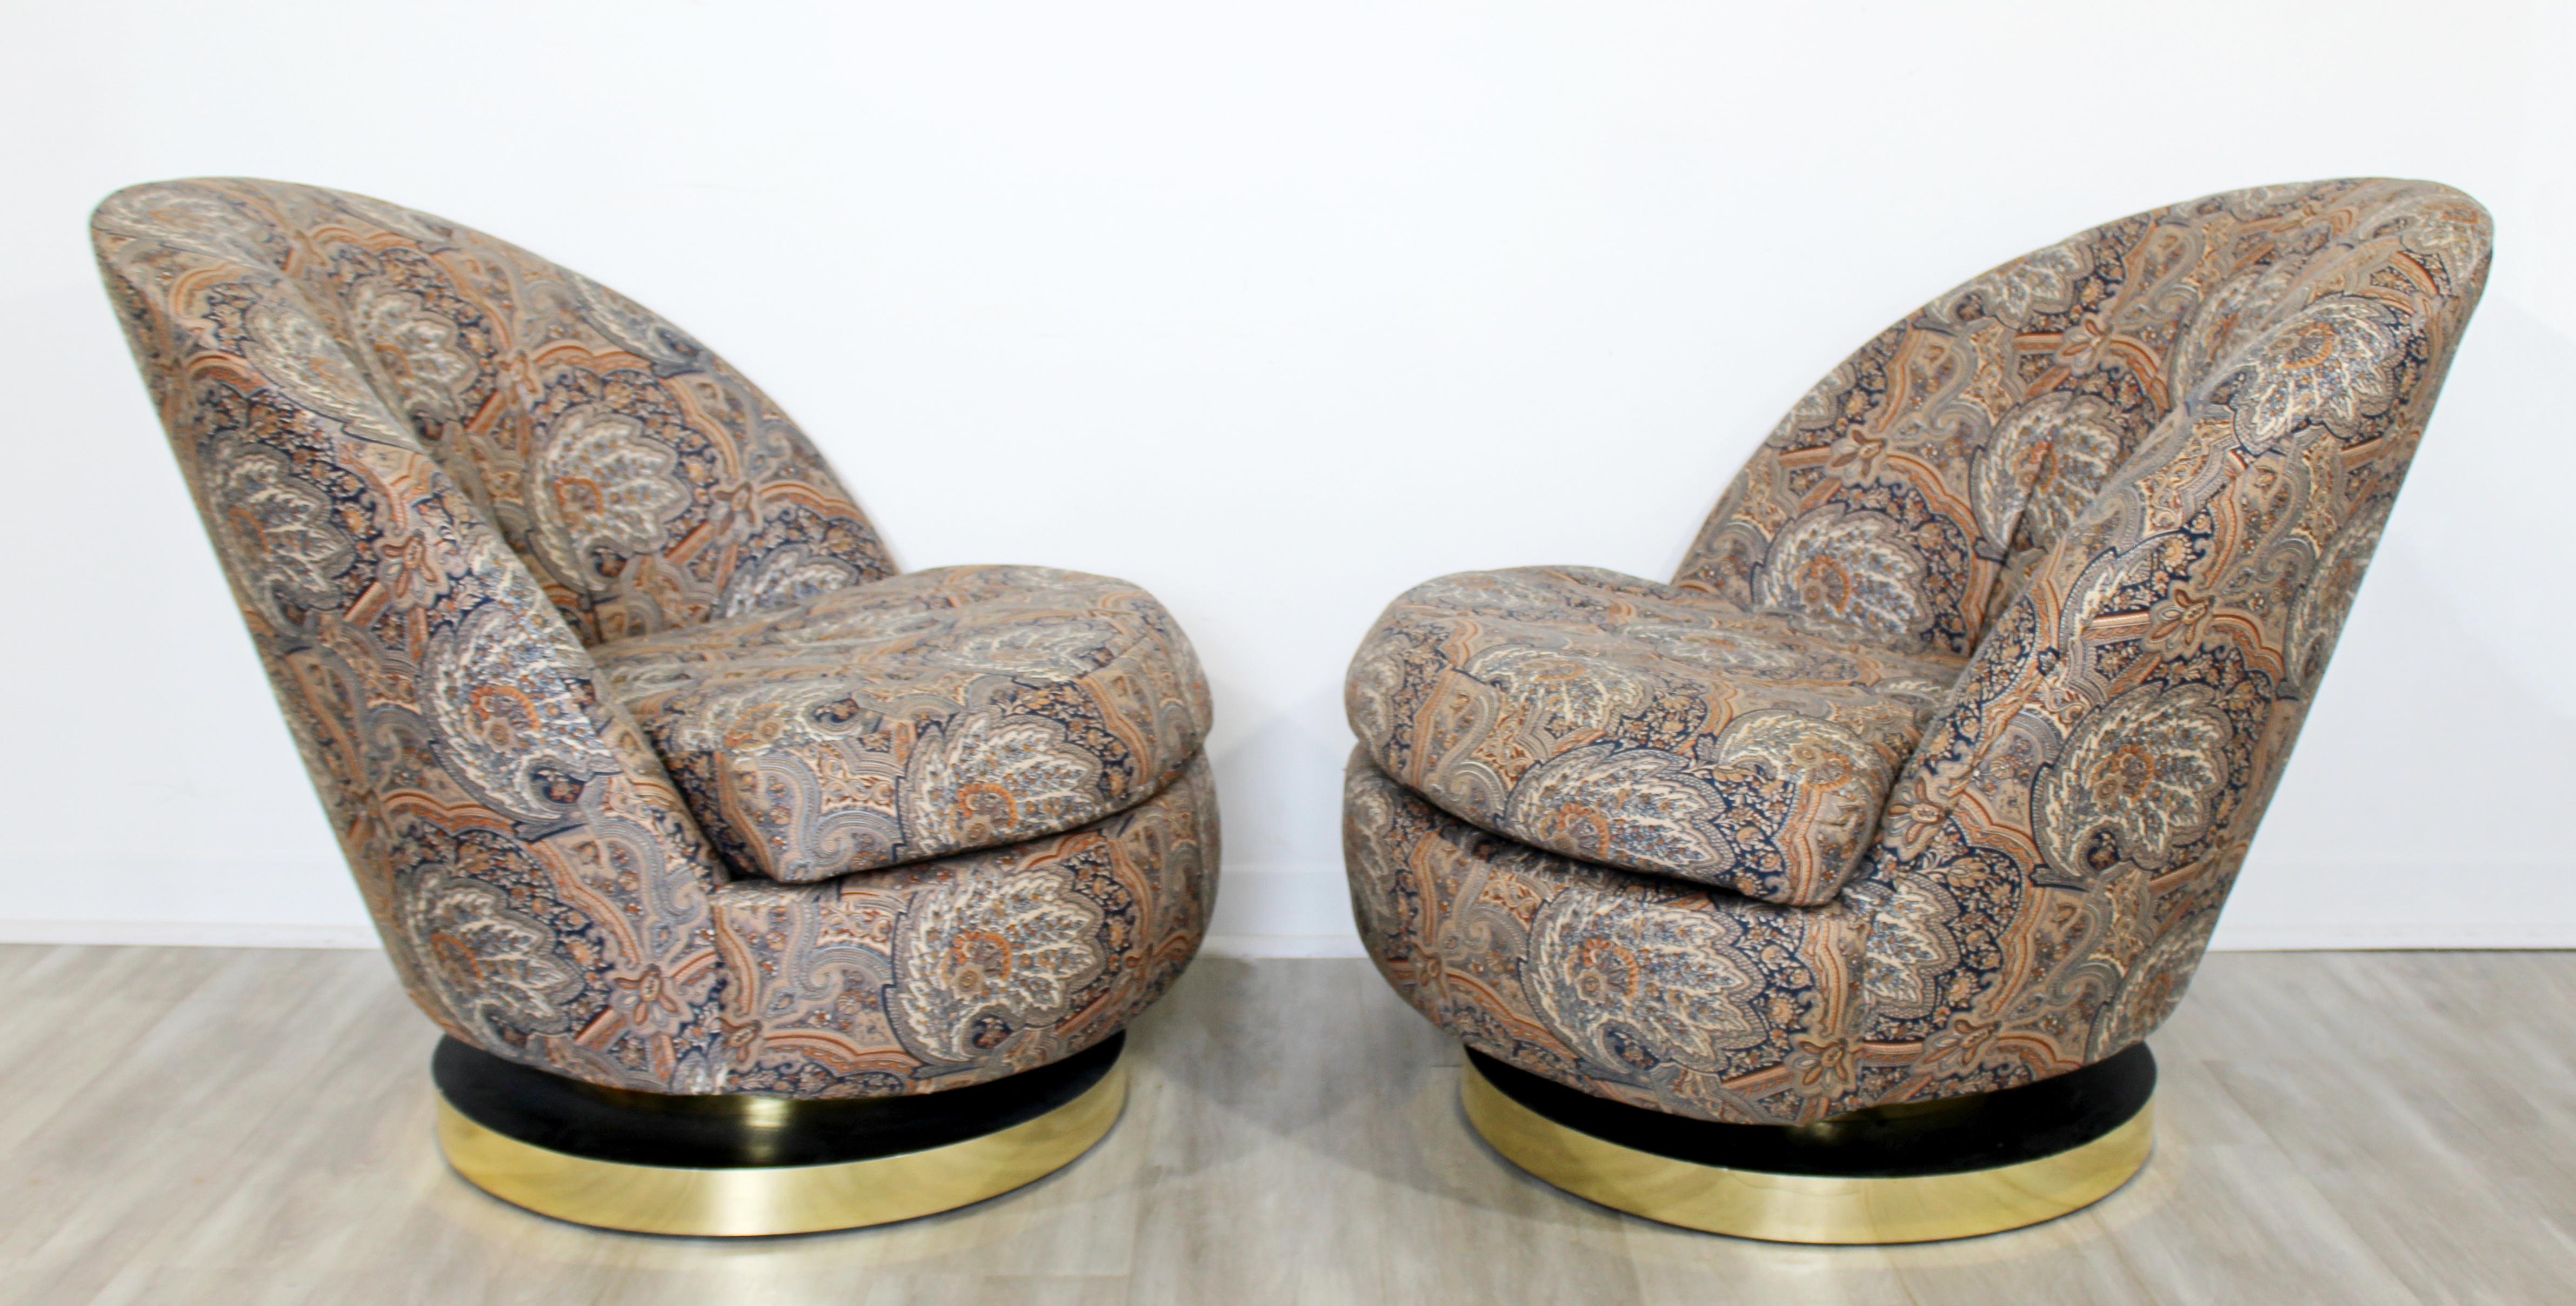 For your consideration is a stupendous pair of curved, swivel, lounge chairs, on brass bases, by Milo Baughman for Thayer Coggin, circa the 1980s. In excellent vintage condition. The dimensions of each are 29